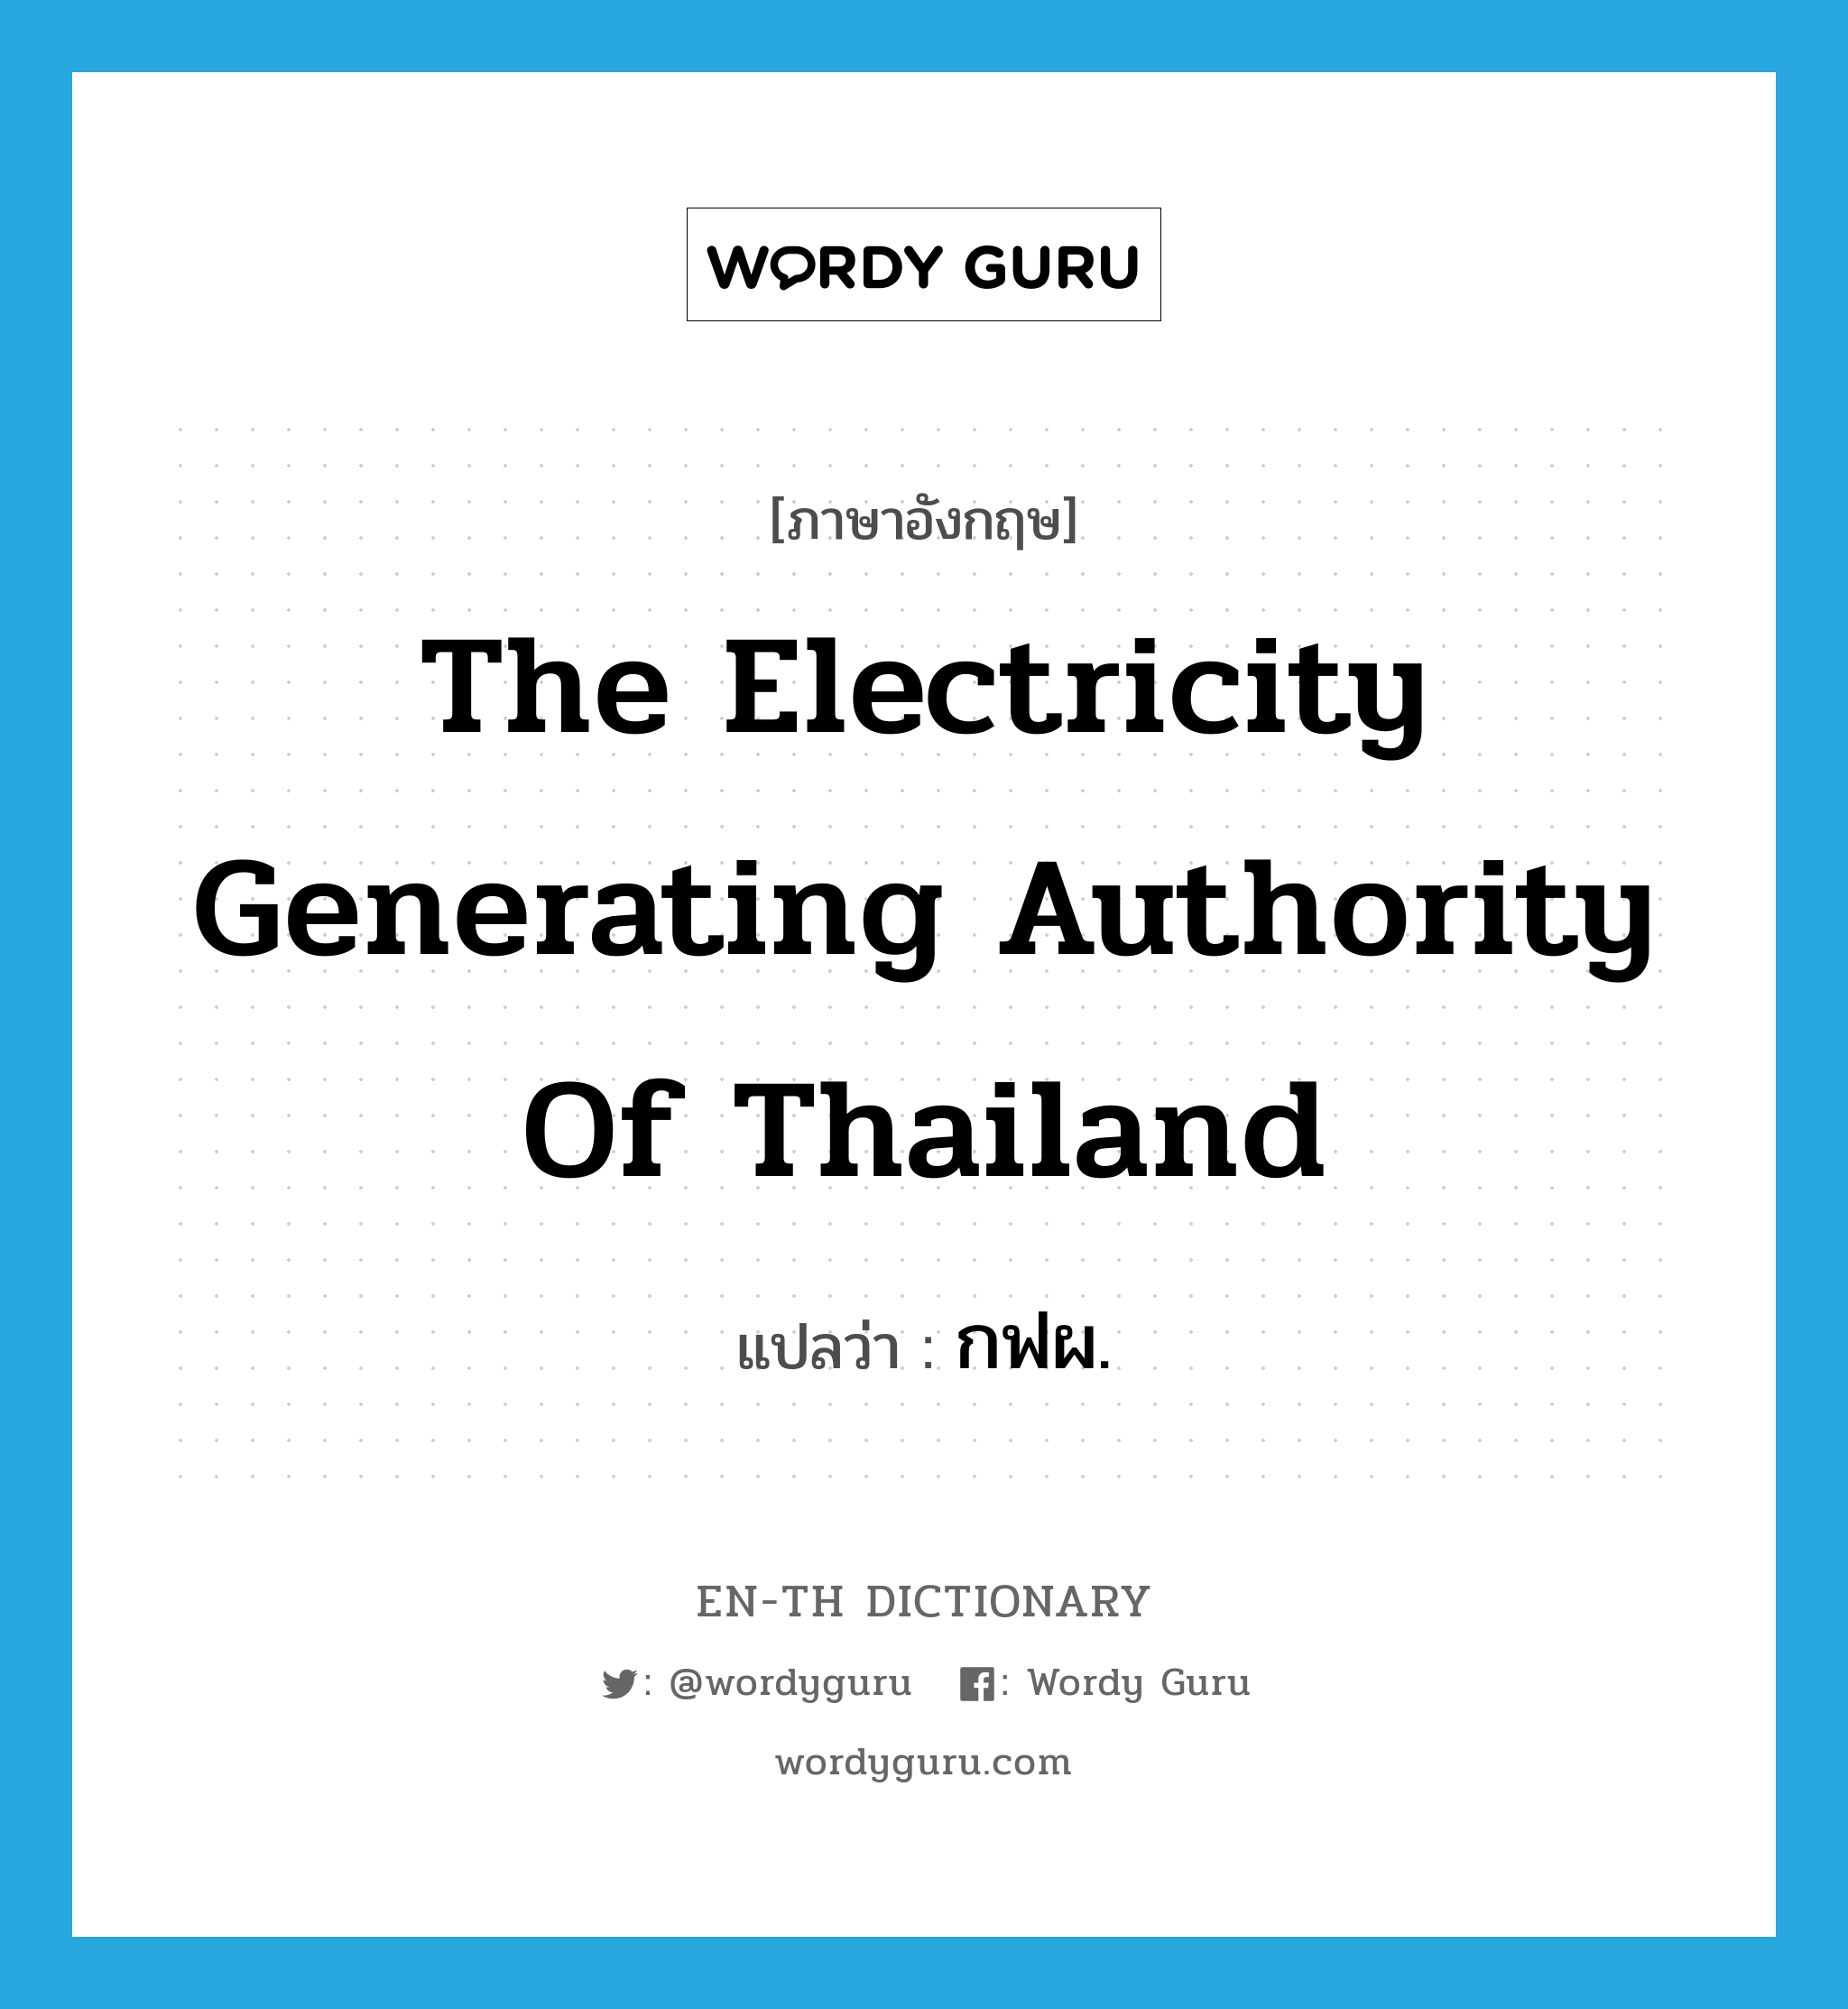 The Electricity Generating Authority of Thailand แปลว่า?, คำศัพท์ภาษาอังกฤษ The Electricity Generating Authority of Thailand แปลว่า กฟผ. ประเภท N หมวด N